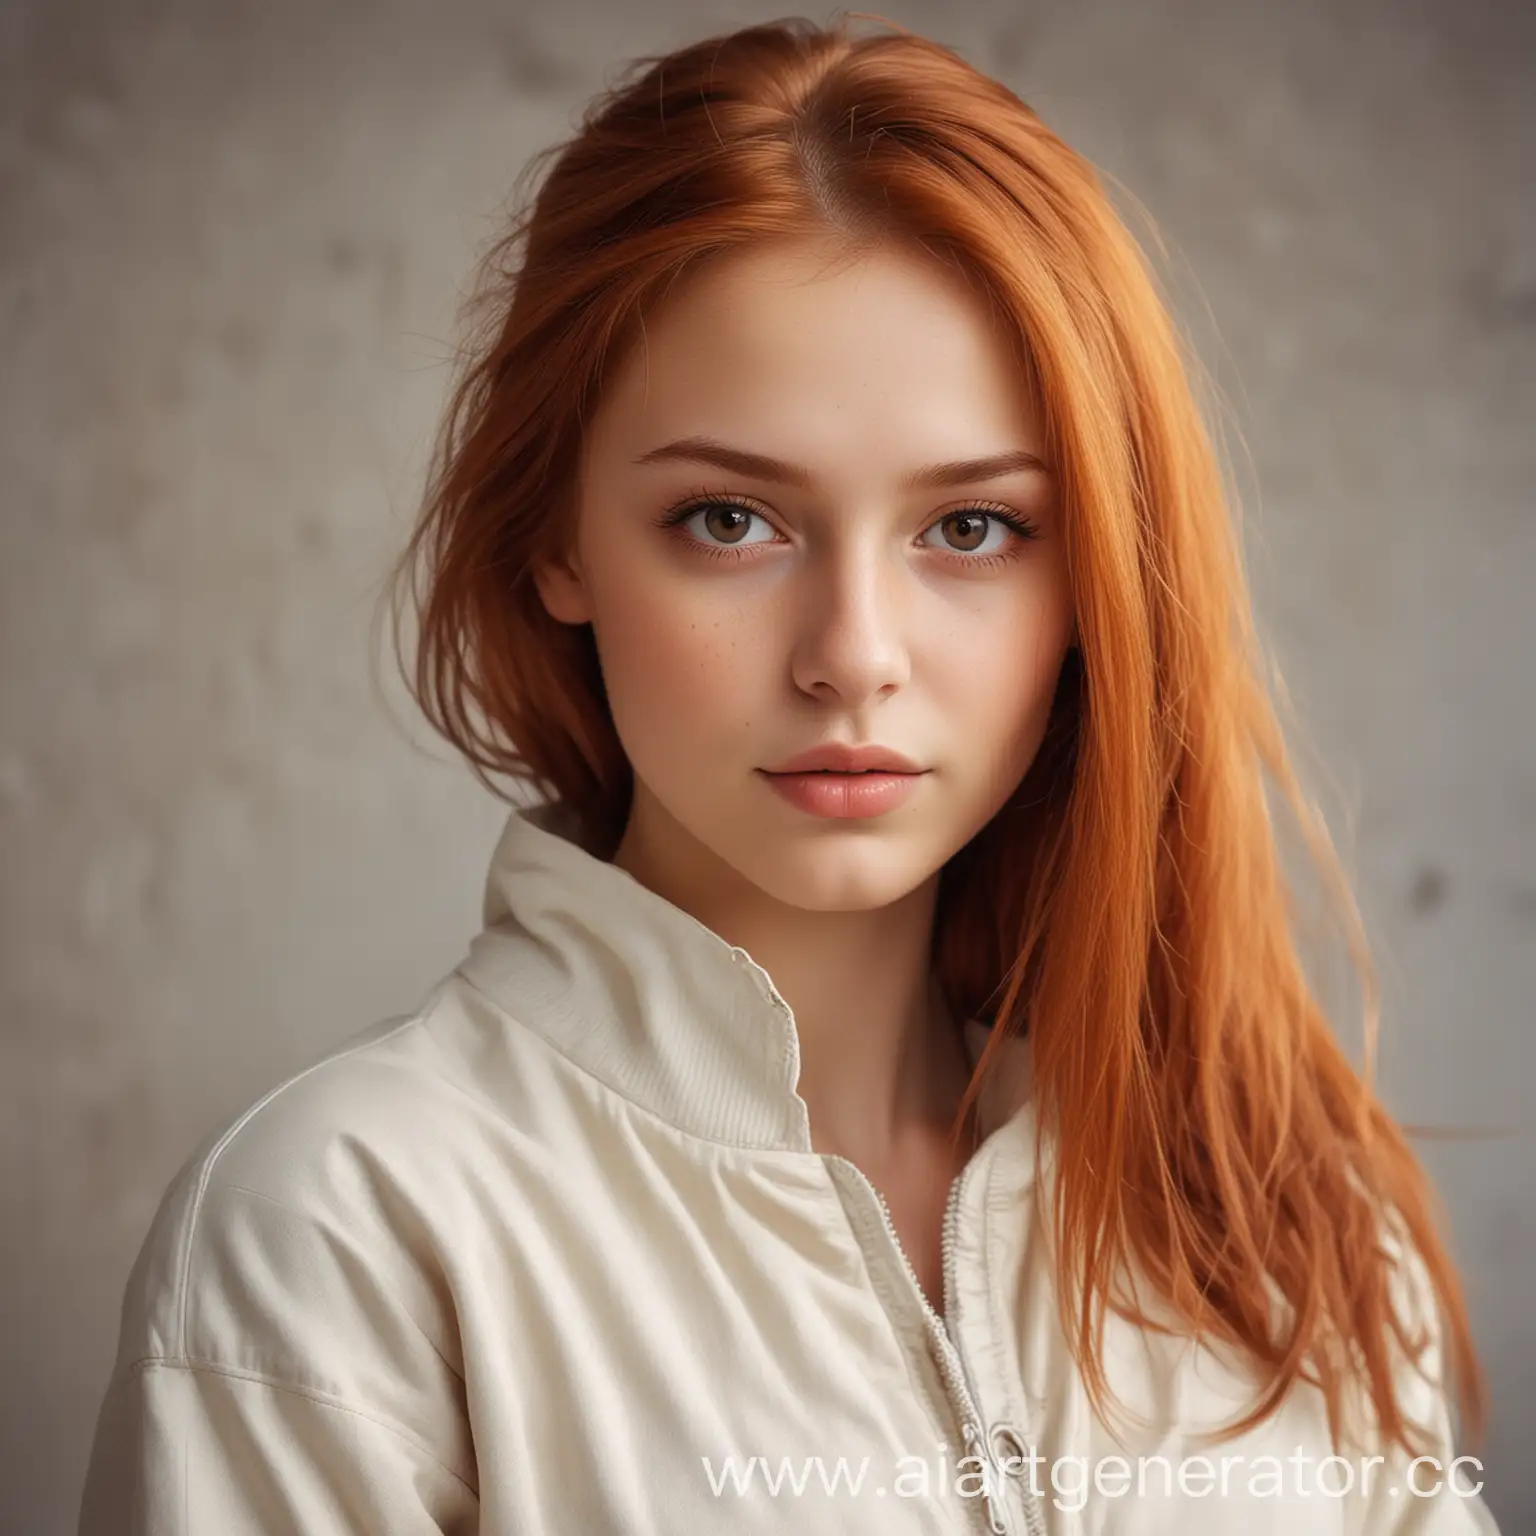 Portrait-of-a-Slavic-Girl-with-Brown-Eyes-and-LightRed-Hair-in-MilkColored-Jacket